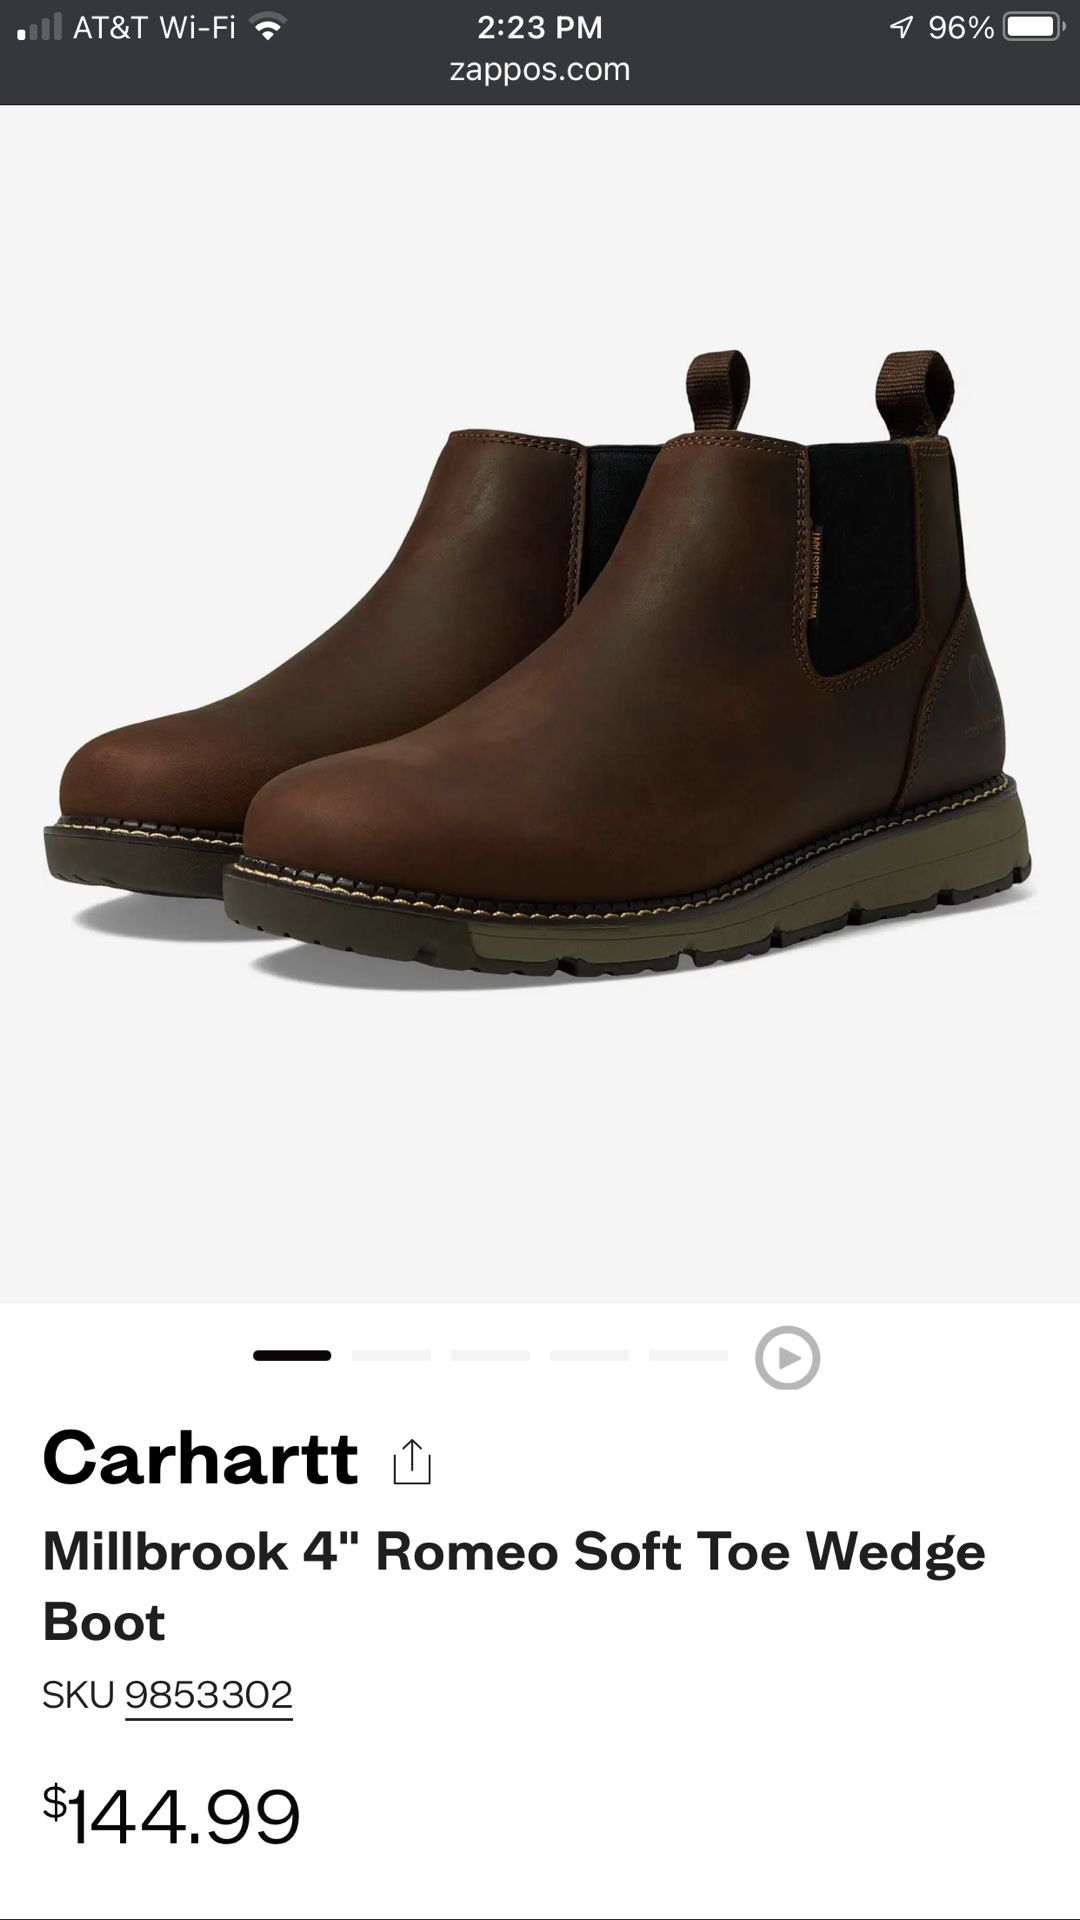 Carhartt Size 11 Romeo Water Proof Work Boots